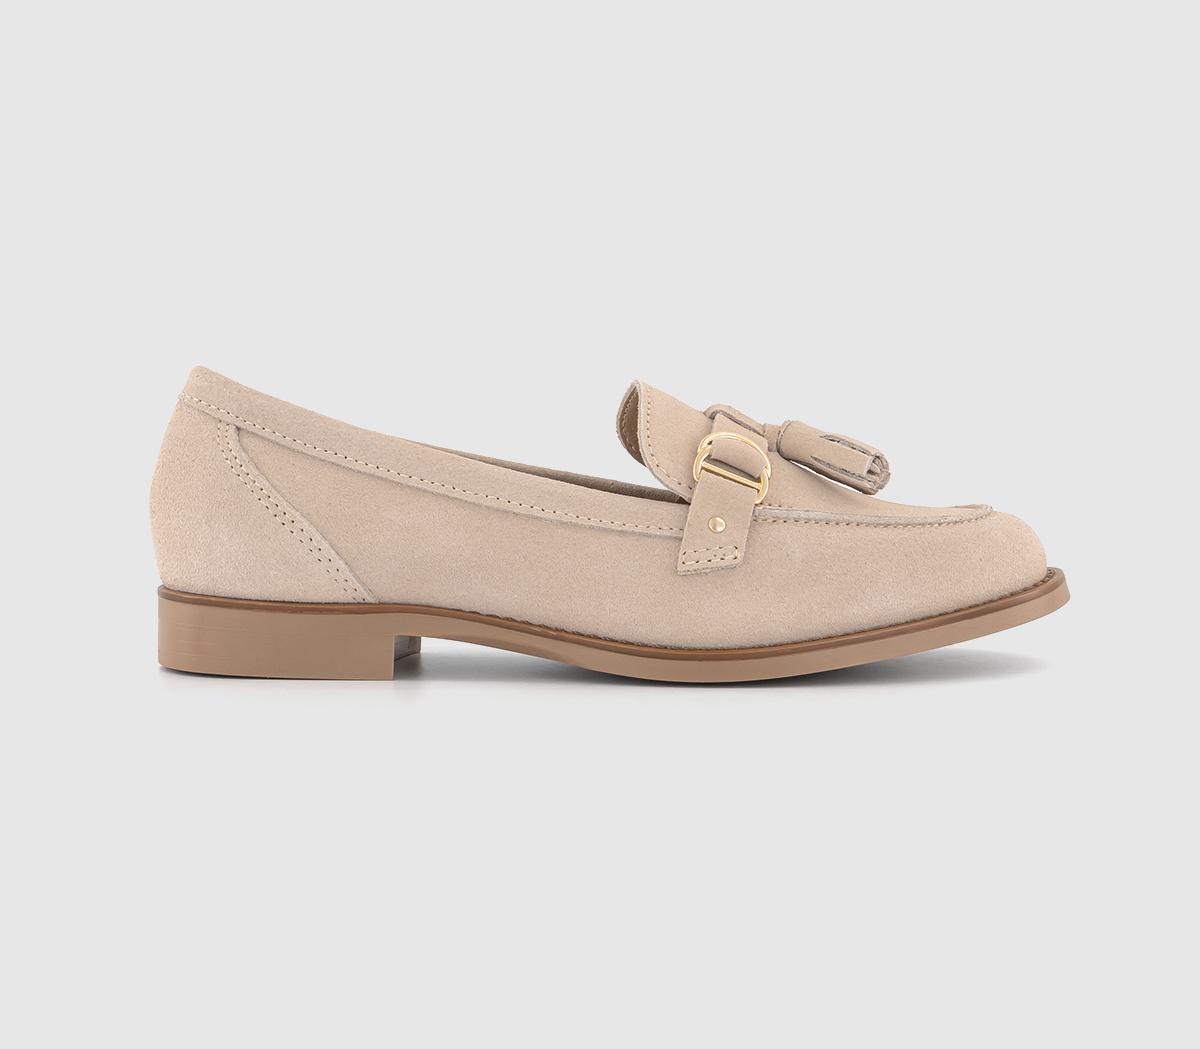 Feels Leather Trim Tassel Loafers Blush Suede Natural